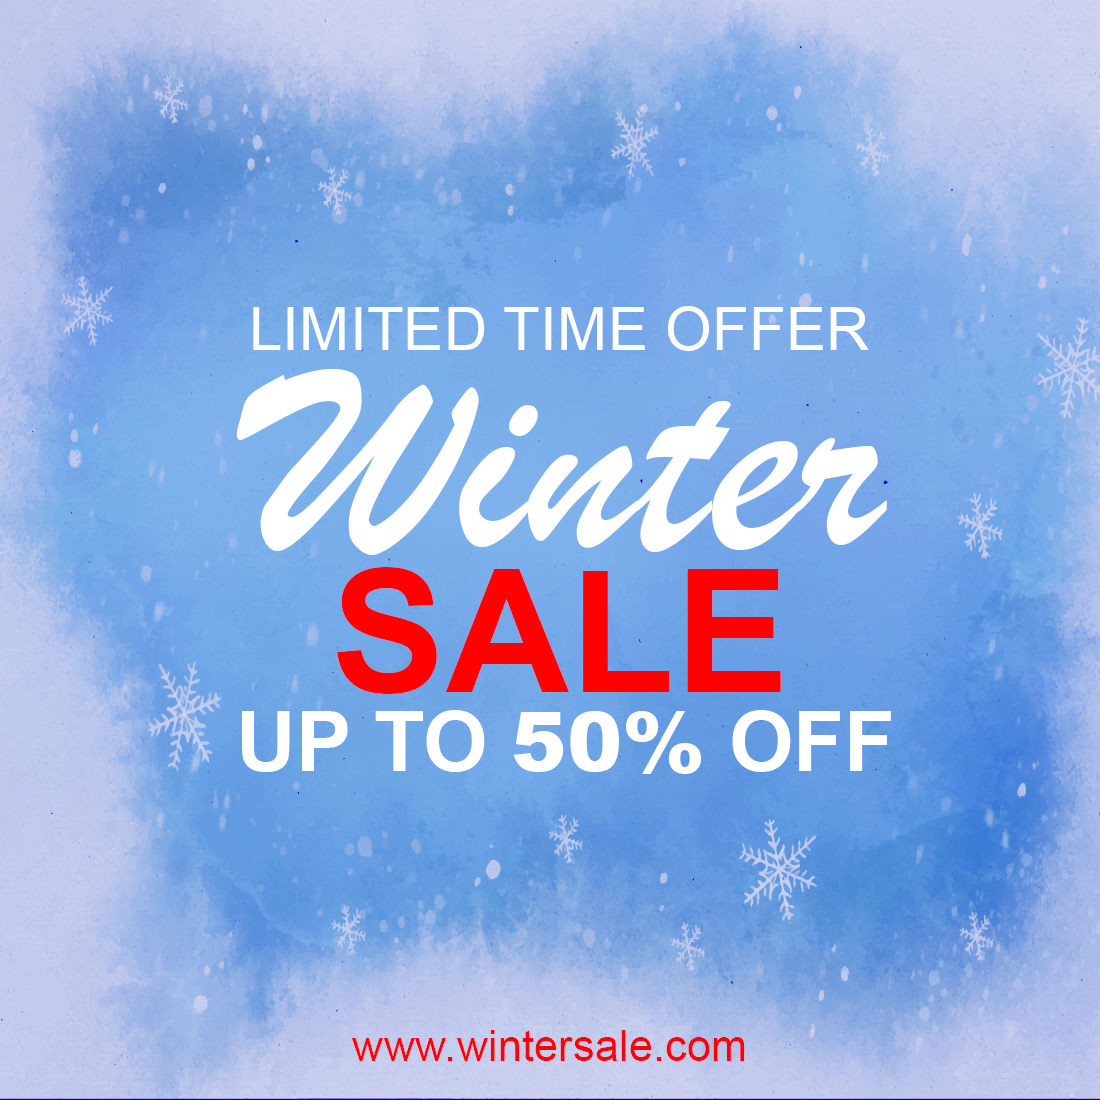 Winter Sale Social Media Post Template Collection cover image.